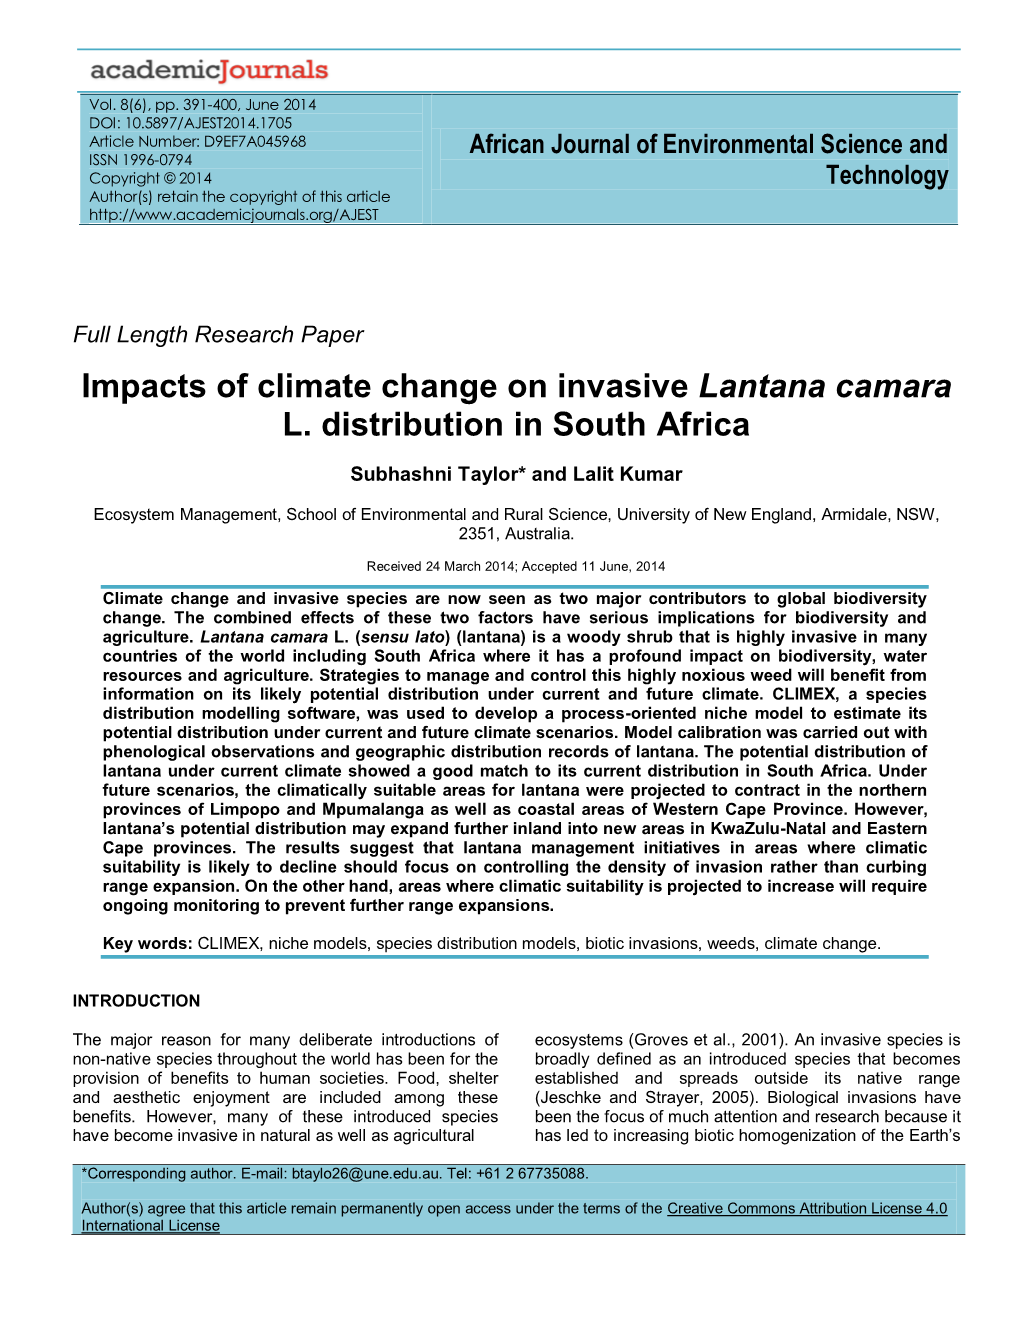 Impacts of Climate Change on Invasive Lantana Camara L. Distribution in South Africa